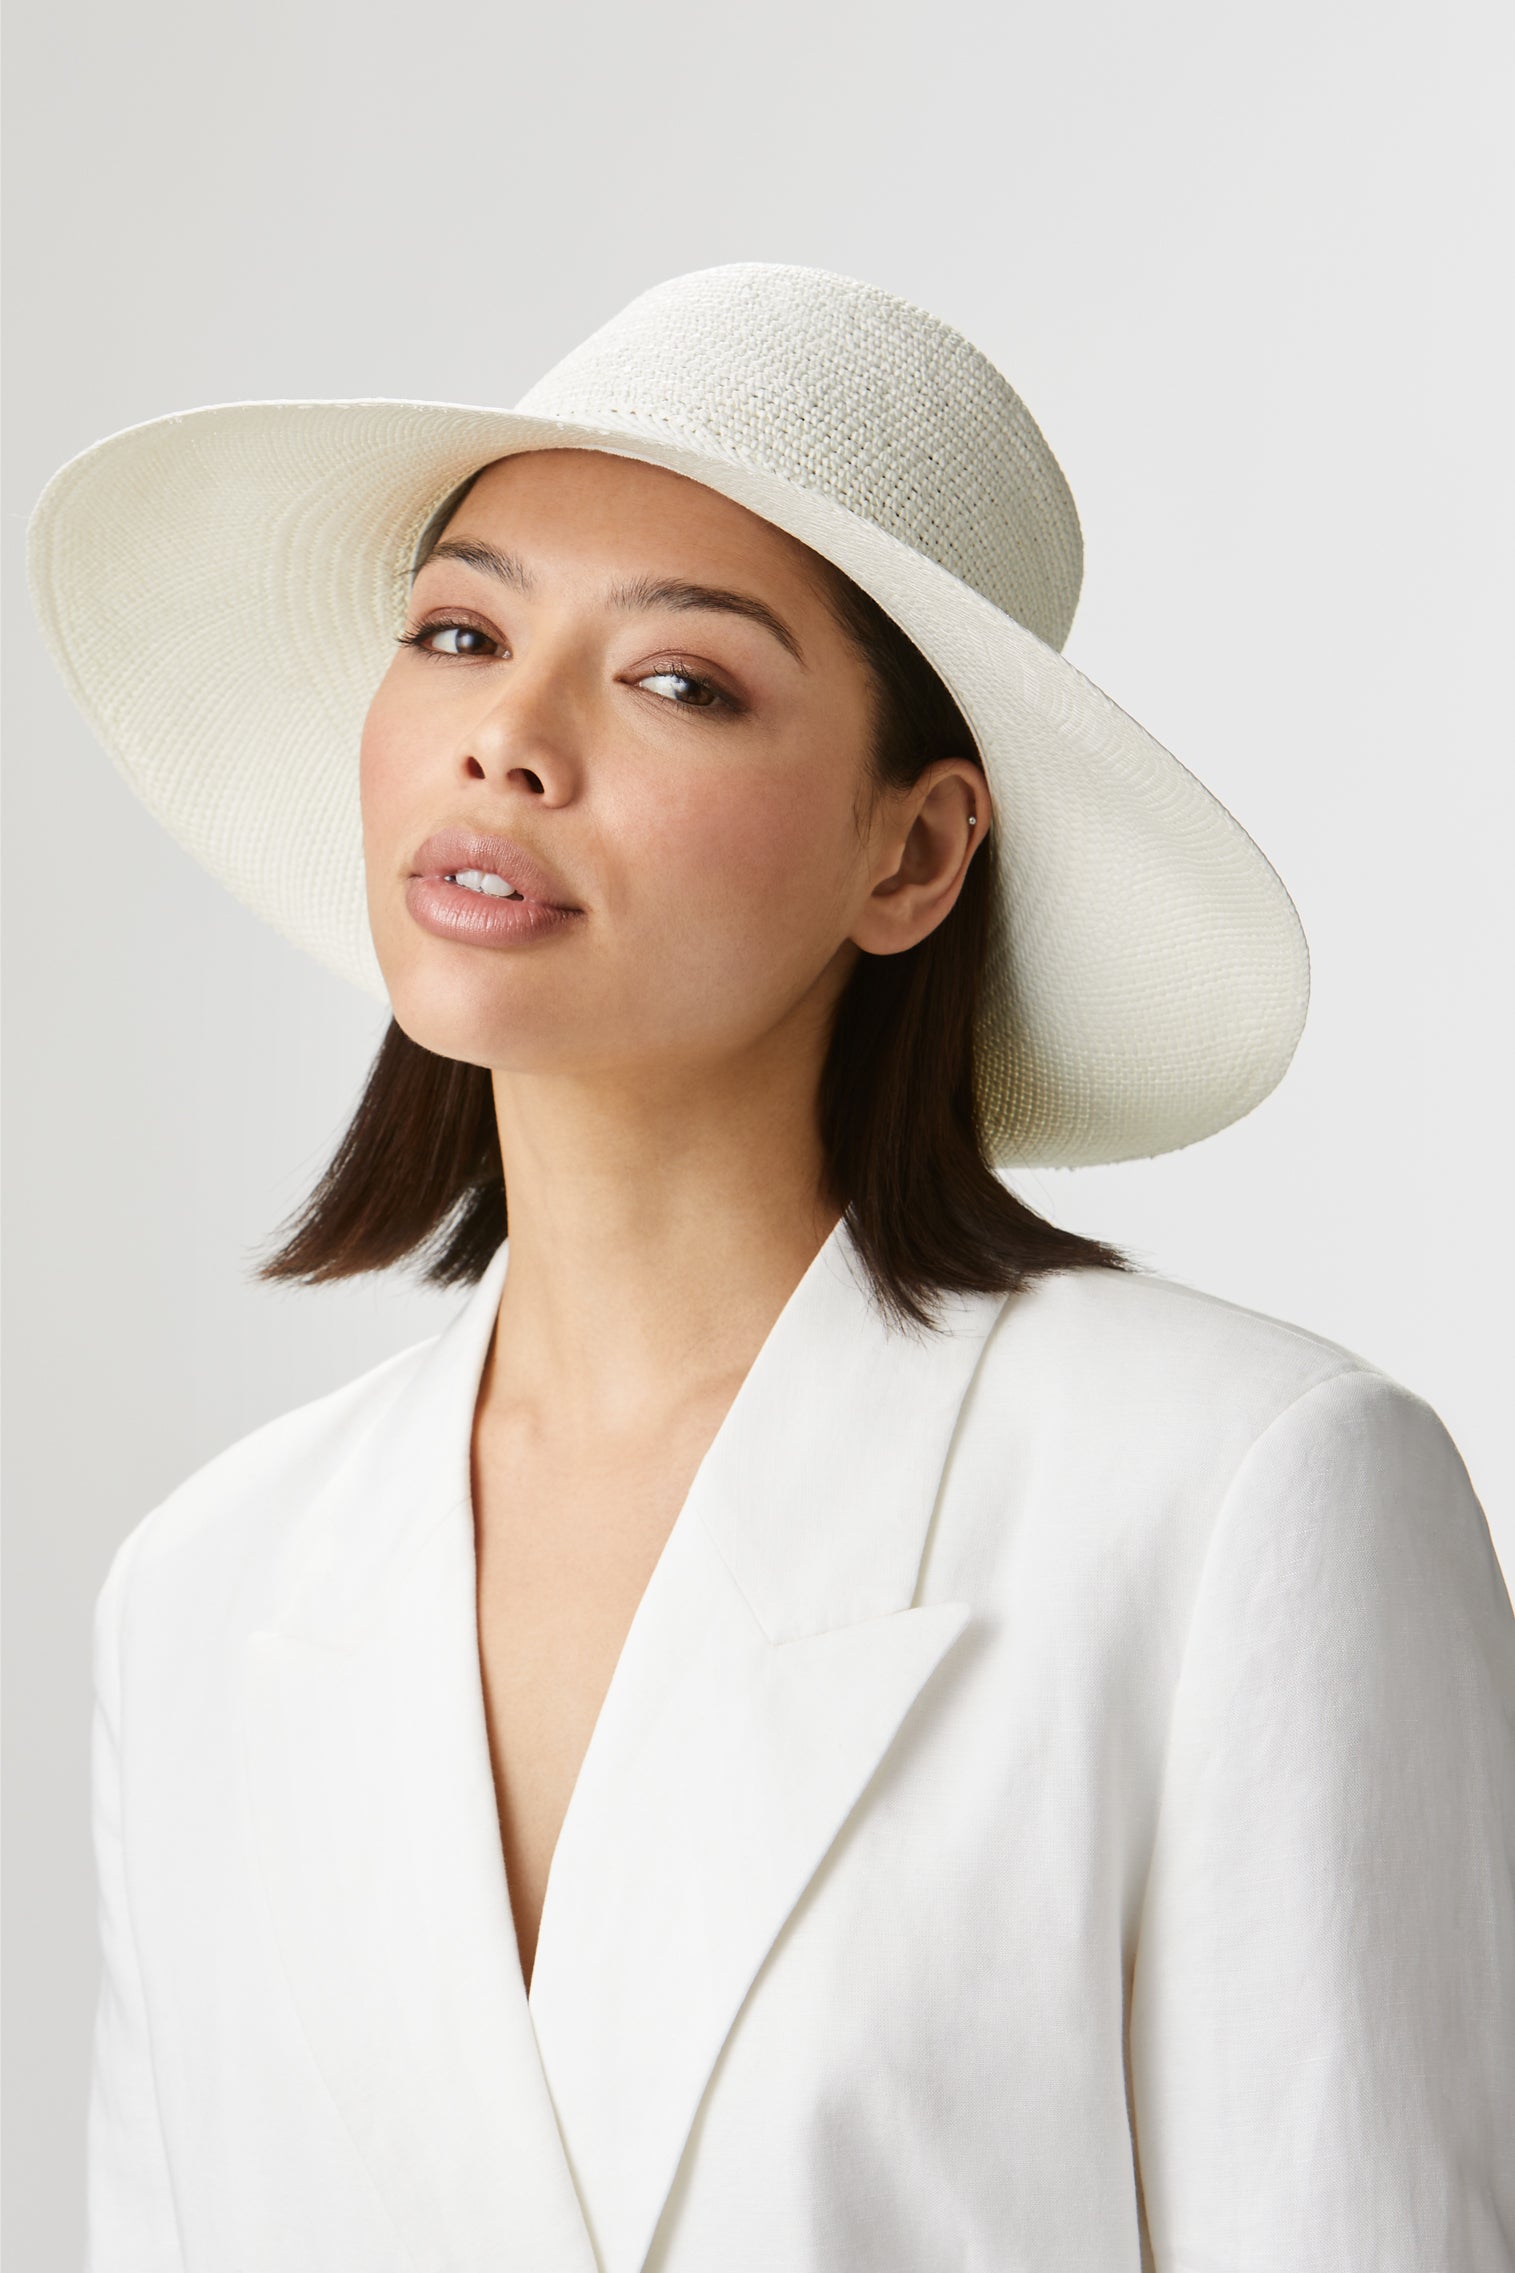 Lucille Sun Hat - Panamas, Straw and Sun Hats for Women - Lock & Co. Hatters London UK